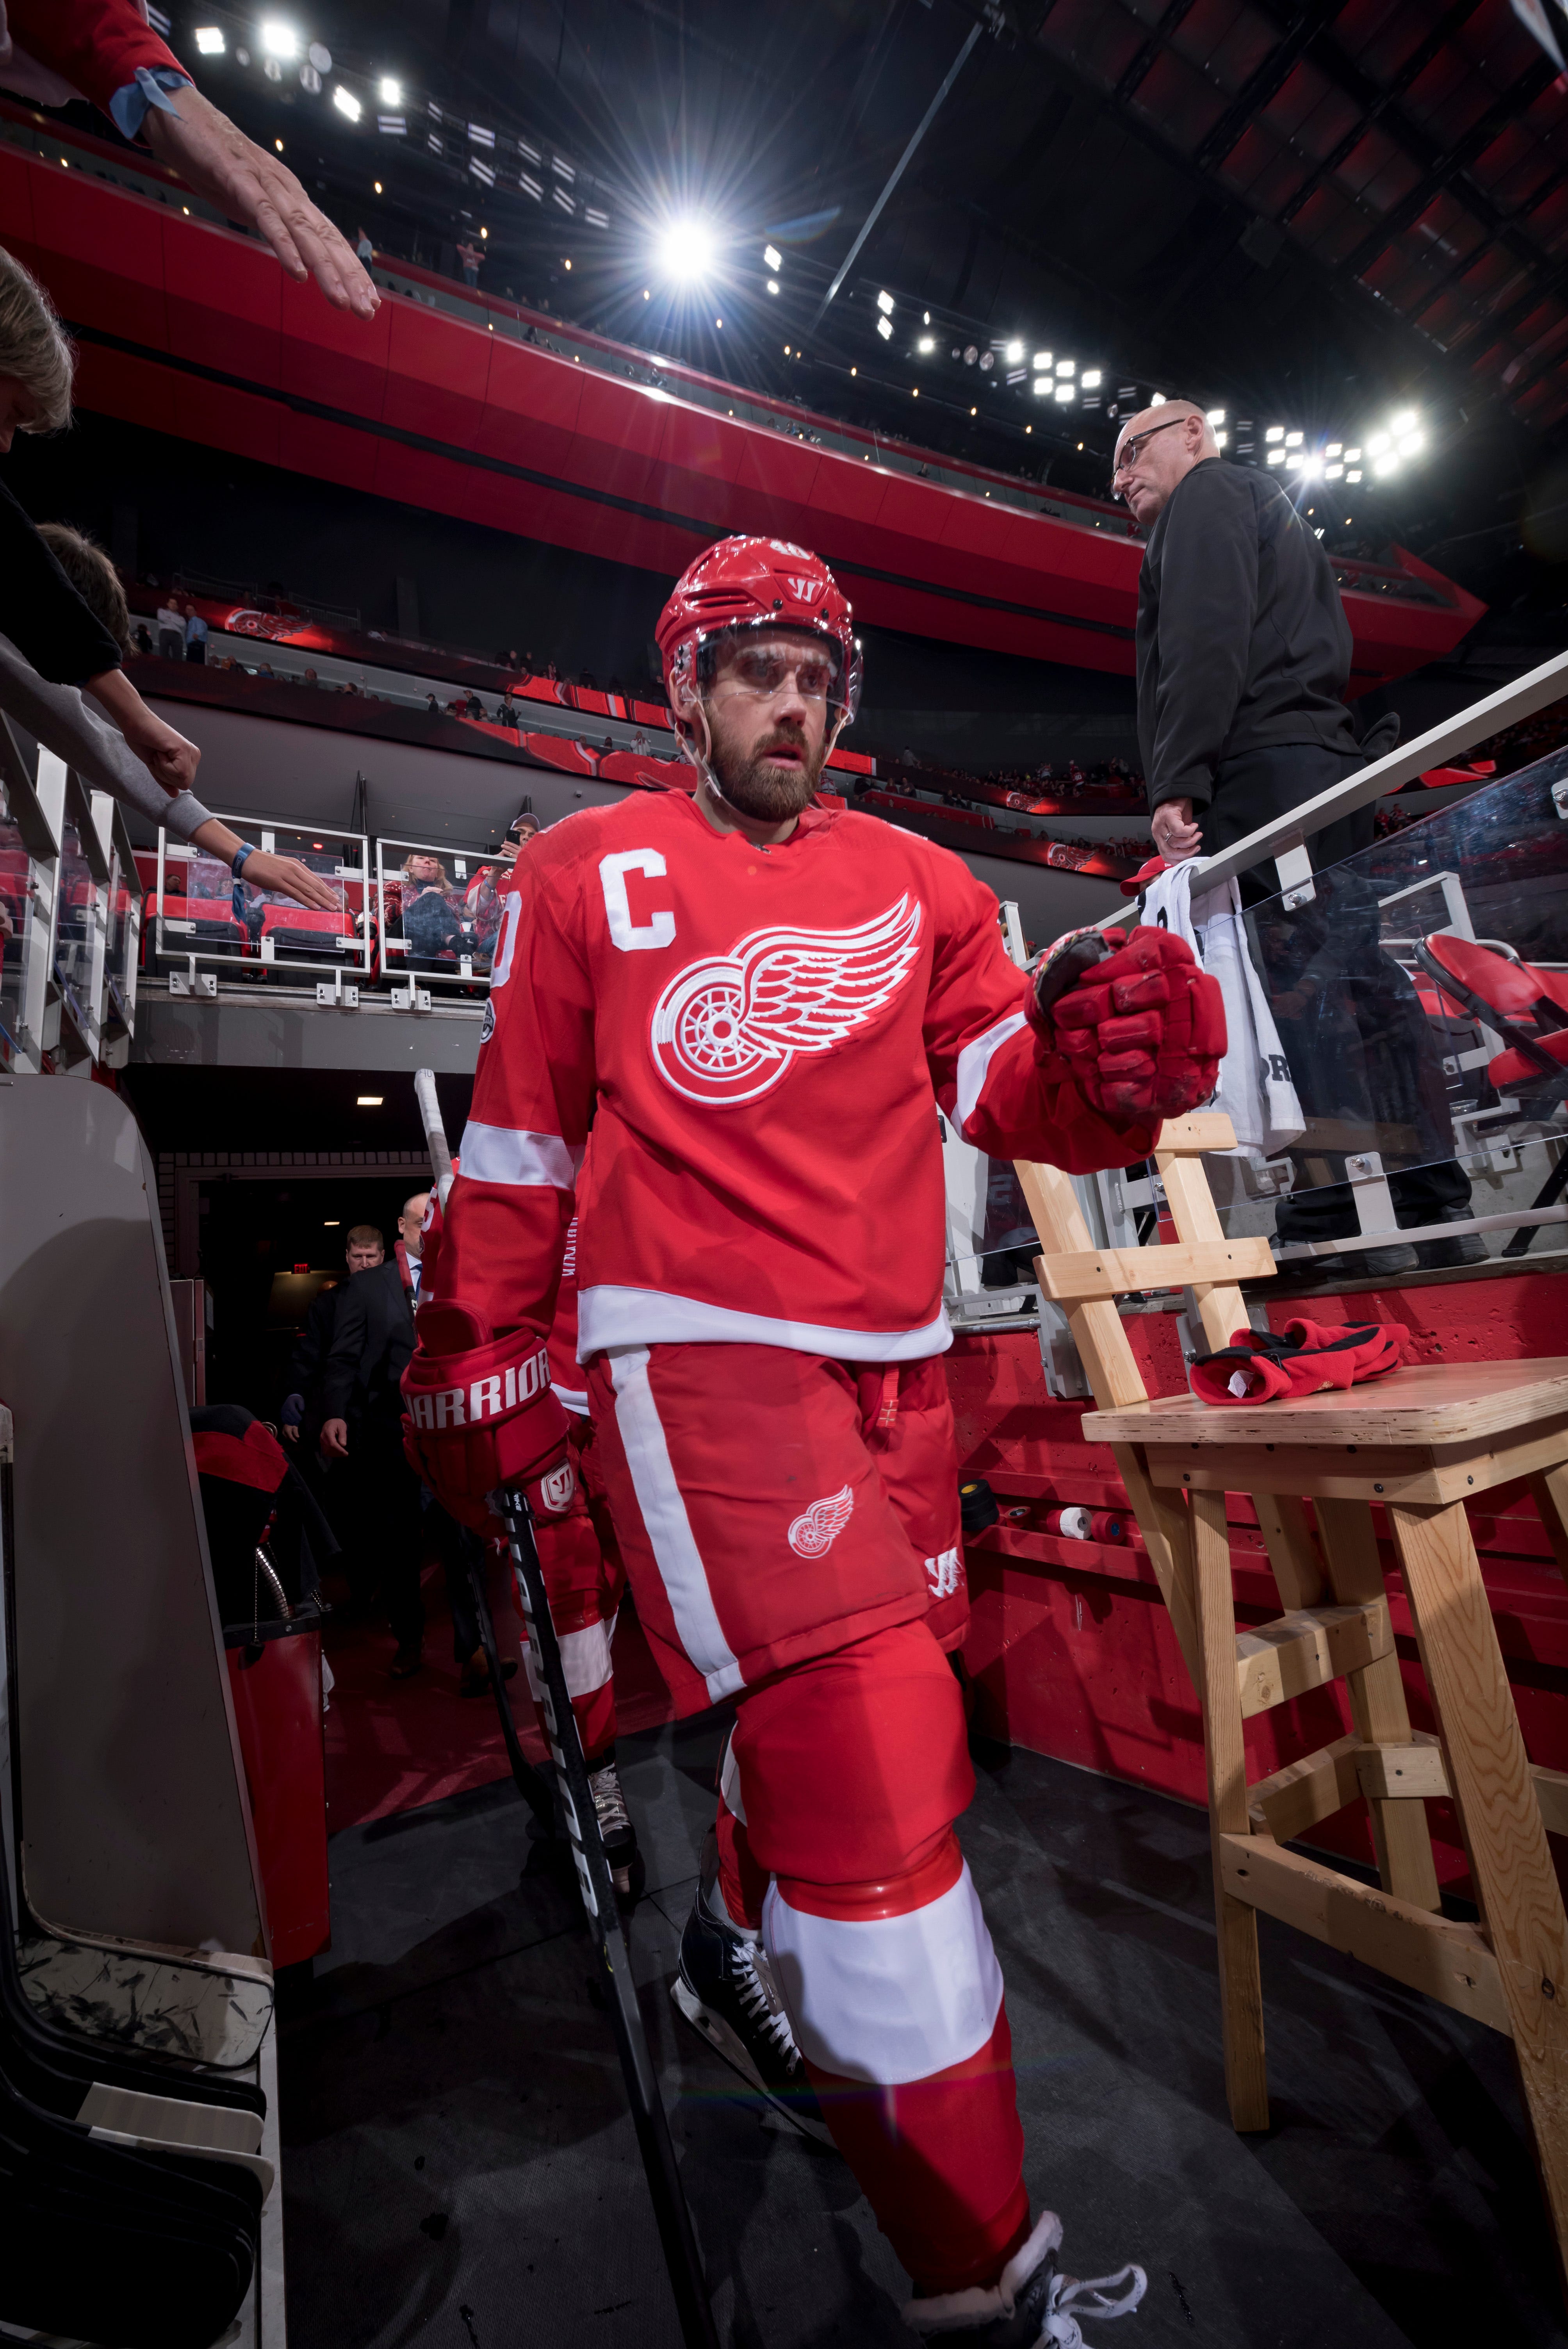 Detroit left wing Henrik Zetterberg comes out of the tunnel for the start of the period.